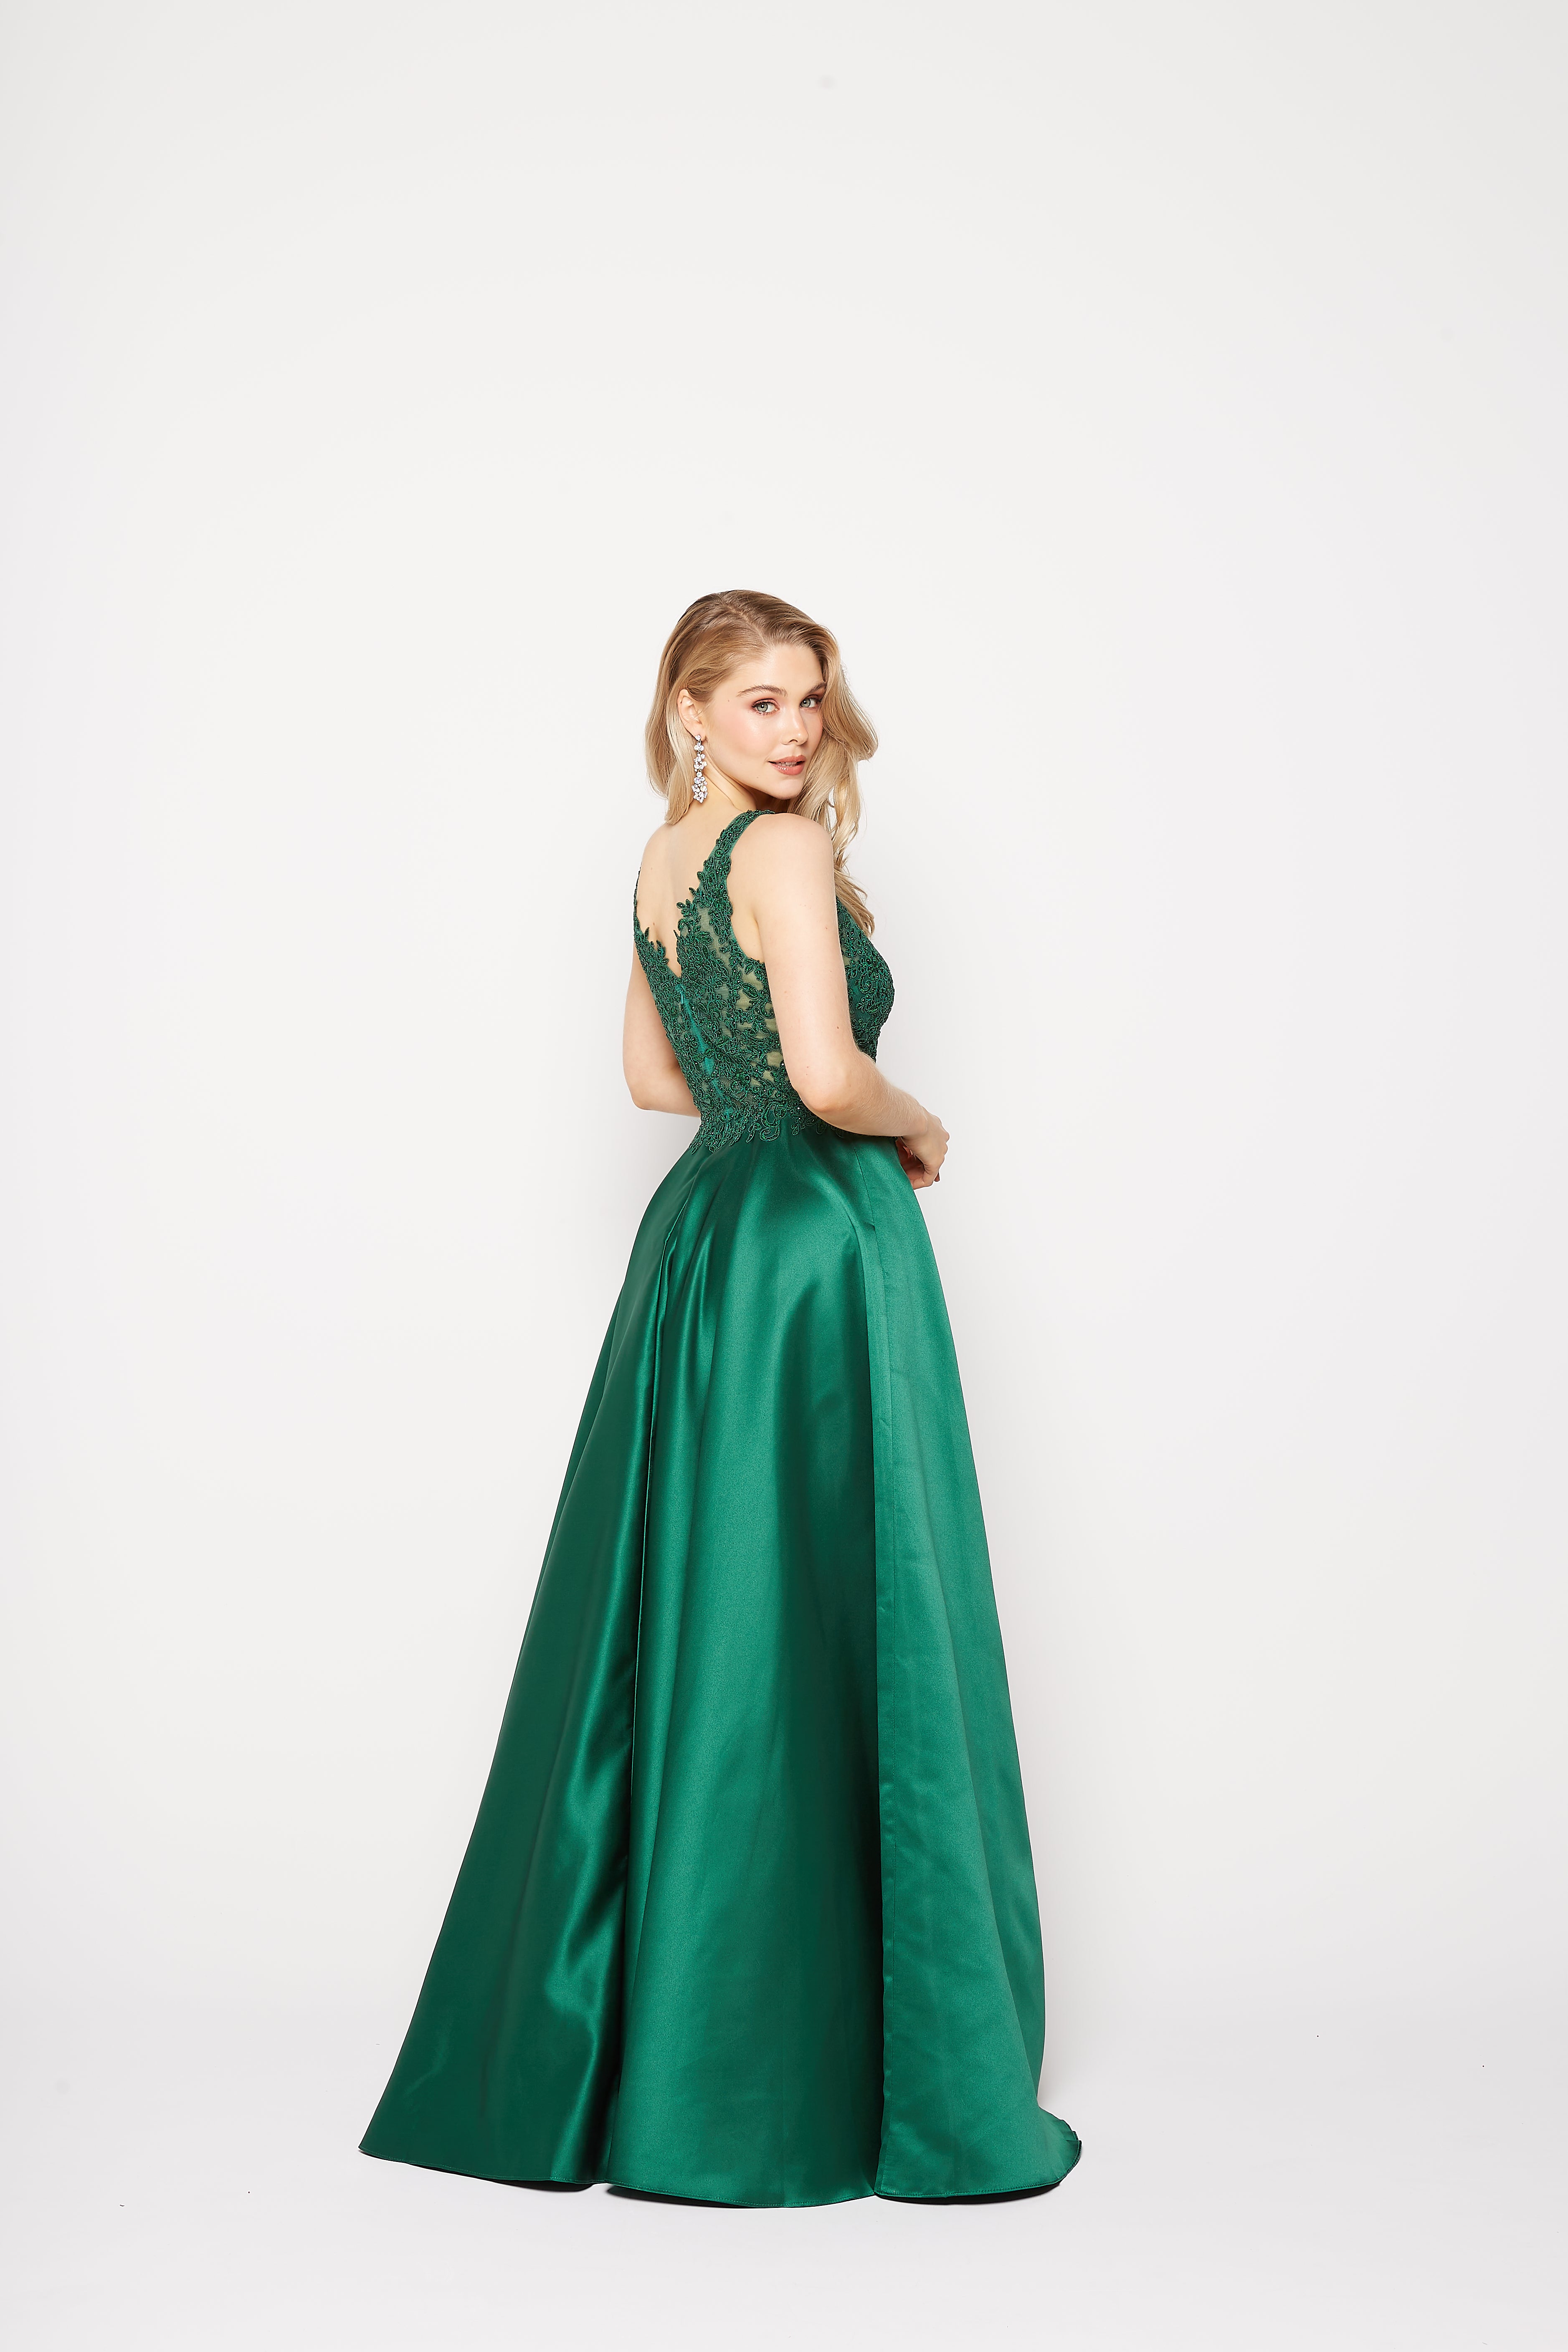 Eden PO2319 by Tania Olsen Navy, Emerald Formal gown